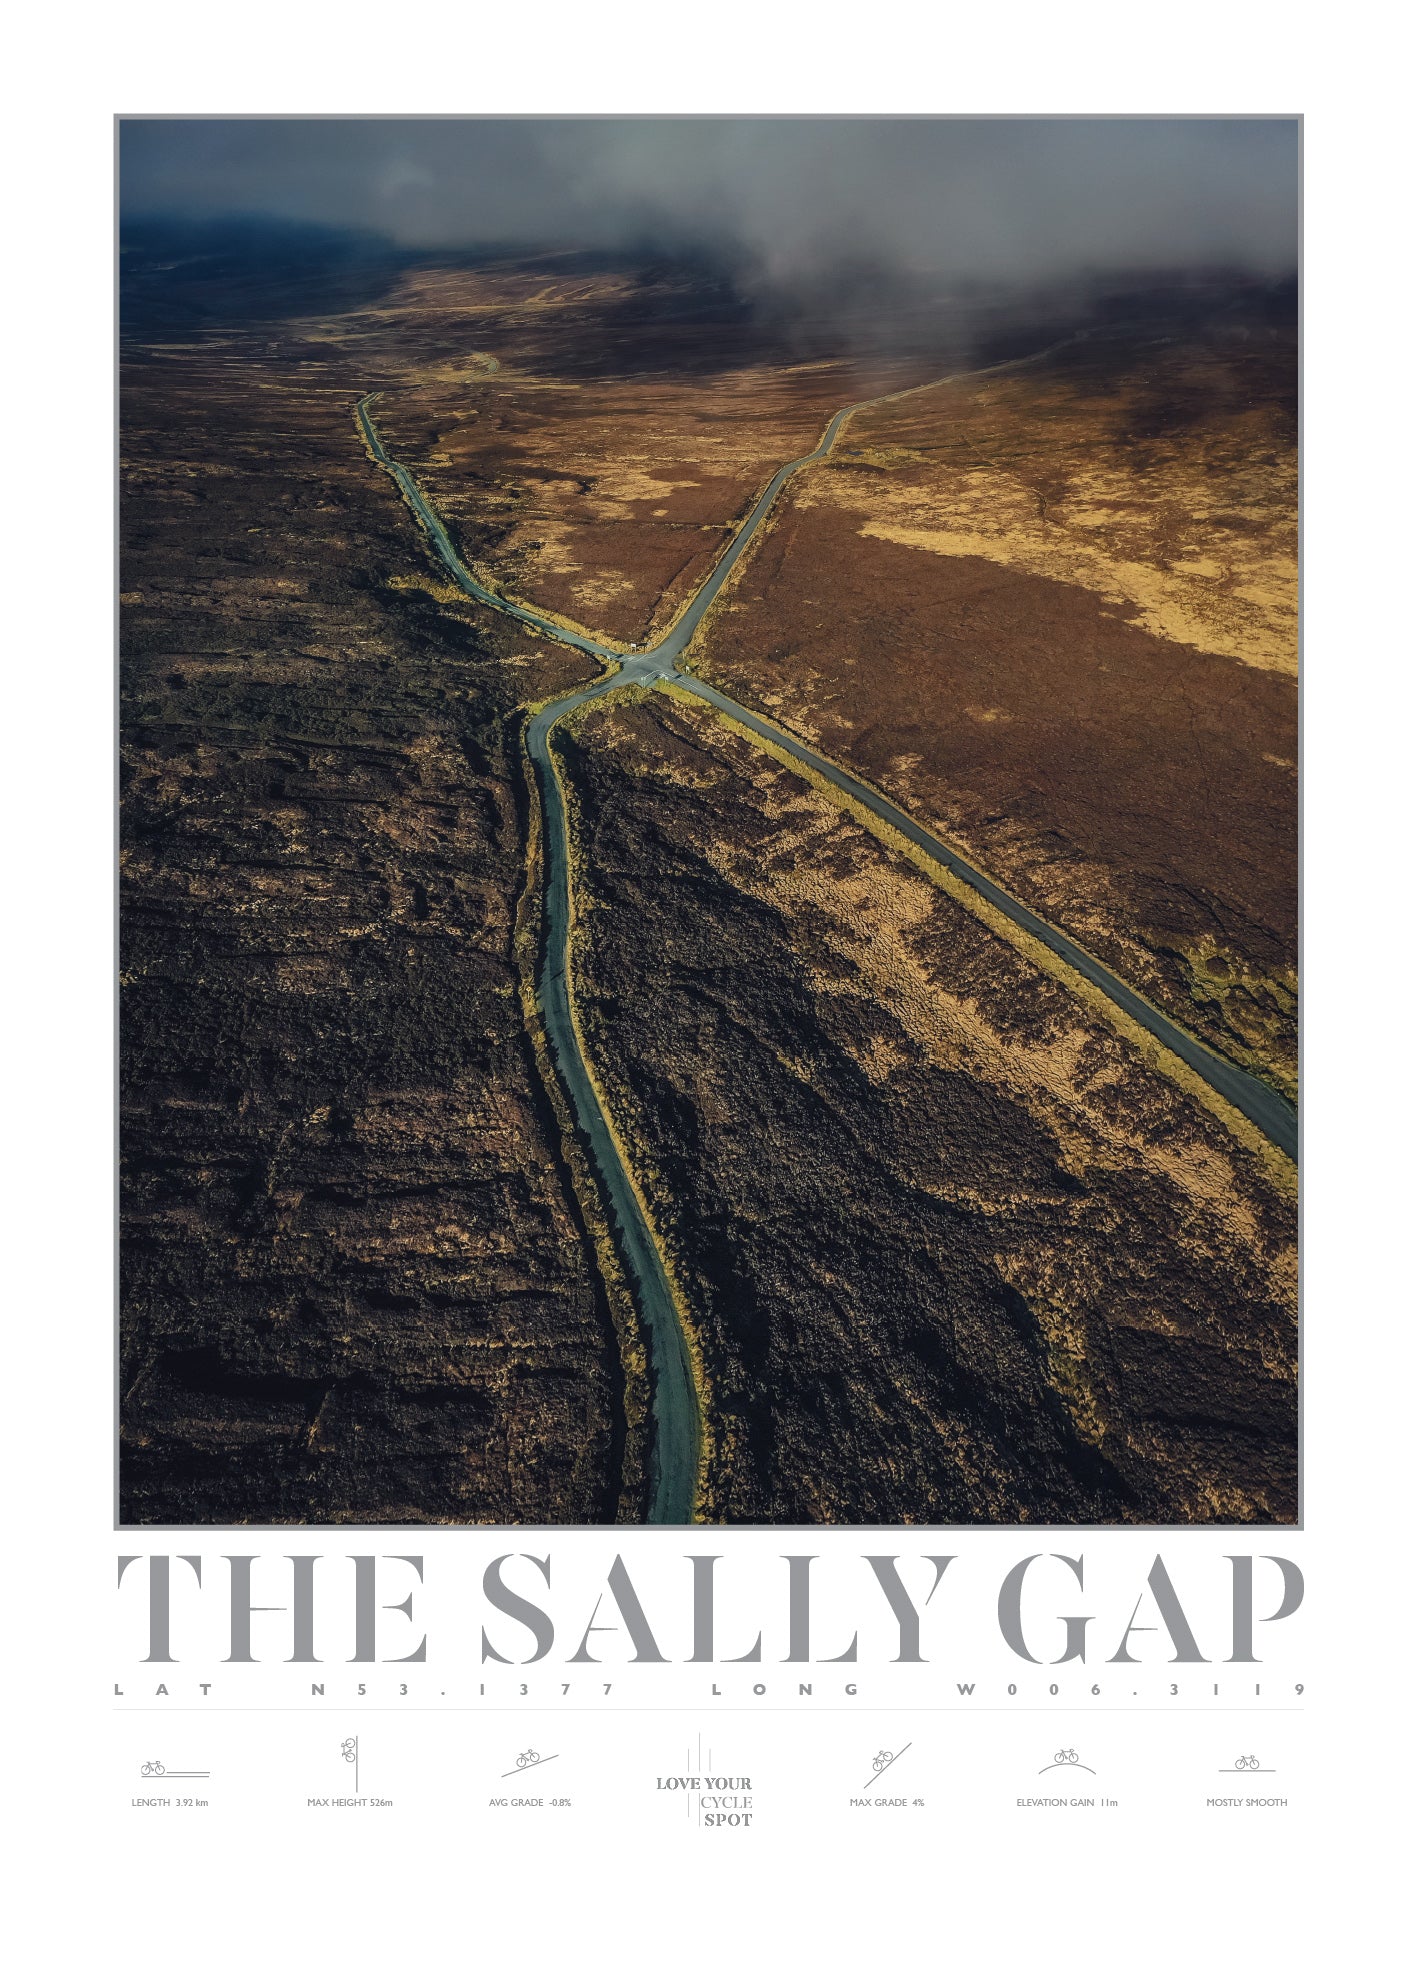 THE SALLY GAP CYCLE SPOT CO WICKLOW